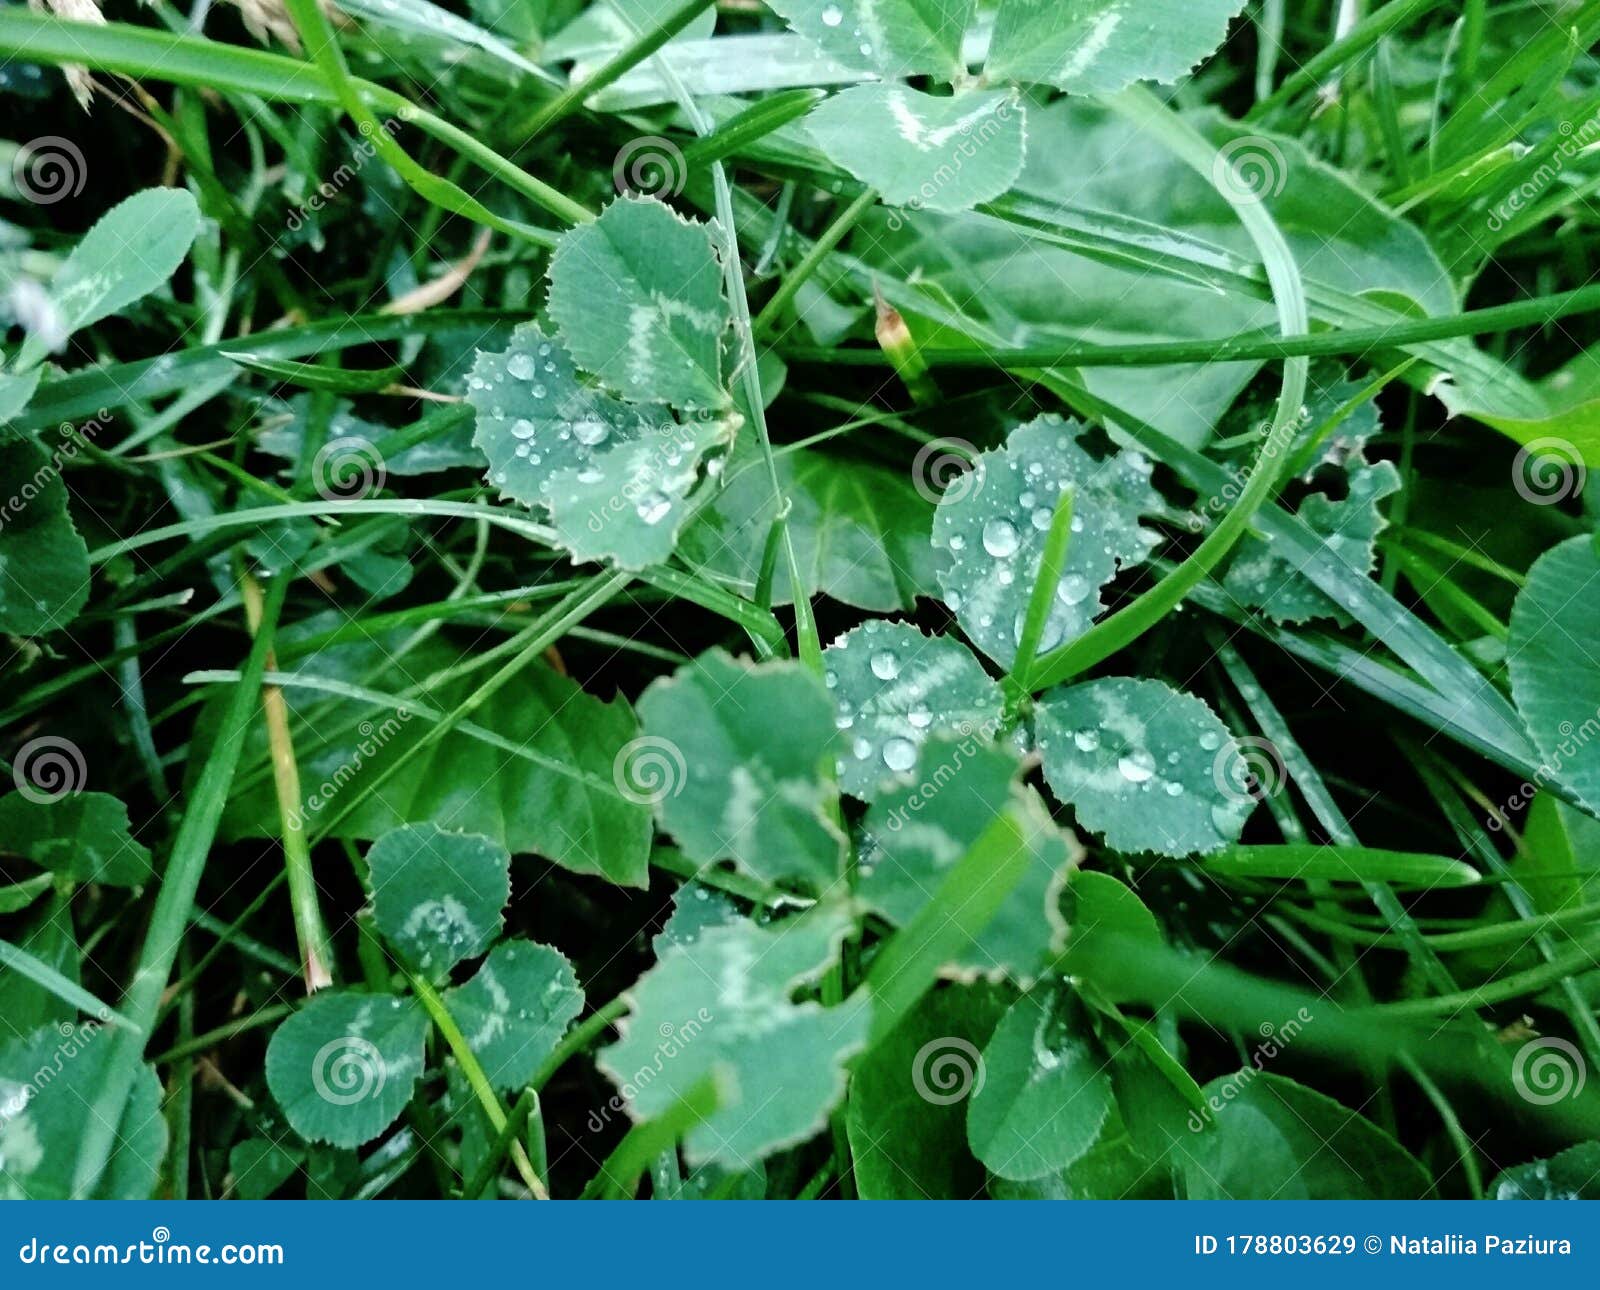 trifolium repens, the white clover (also known as dutch clover, ladino clover, or ladino) plant growing  in the ground